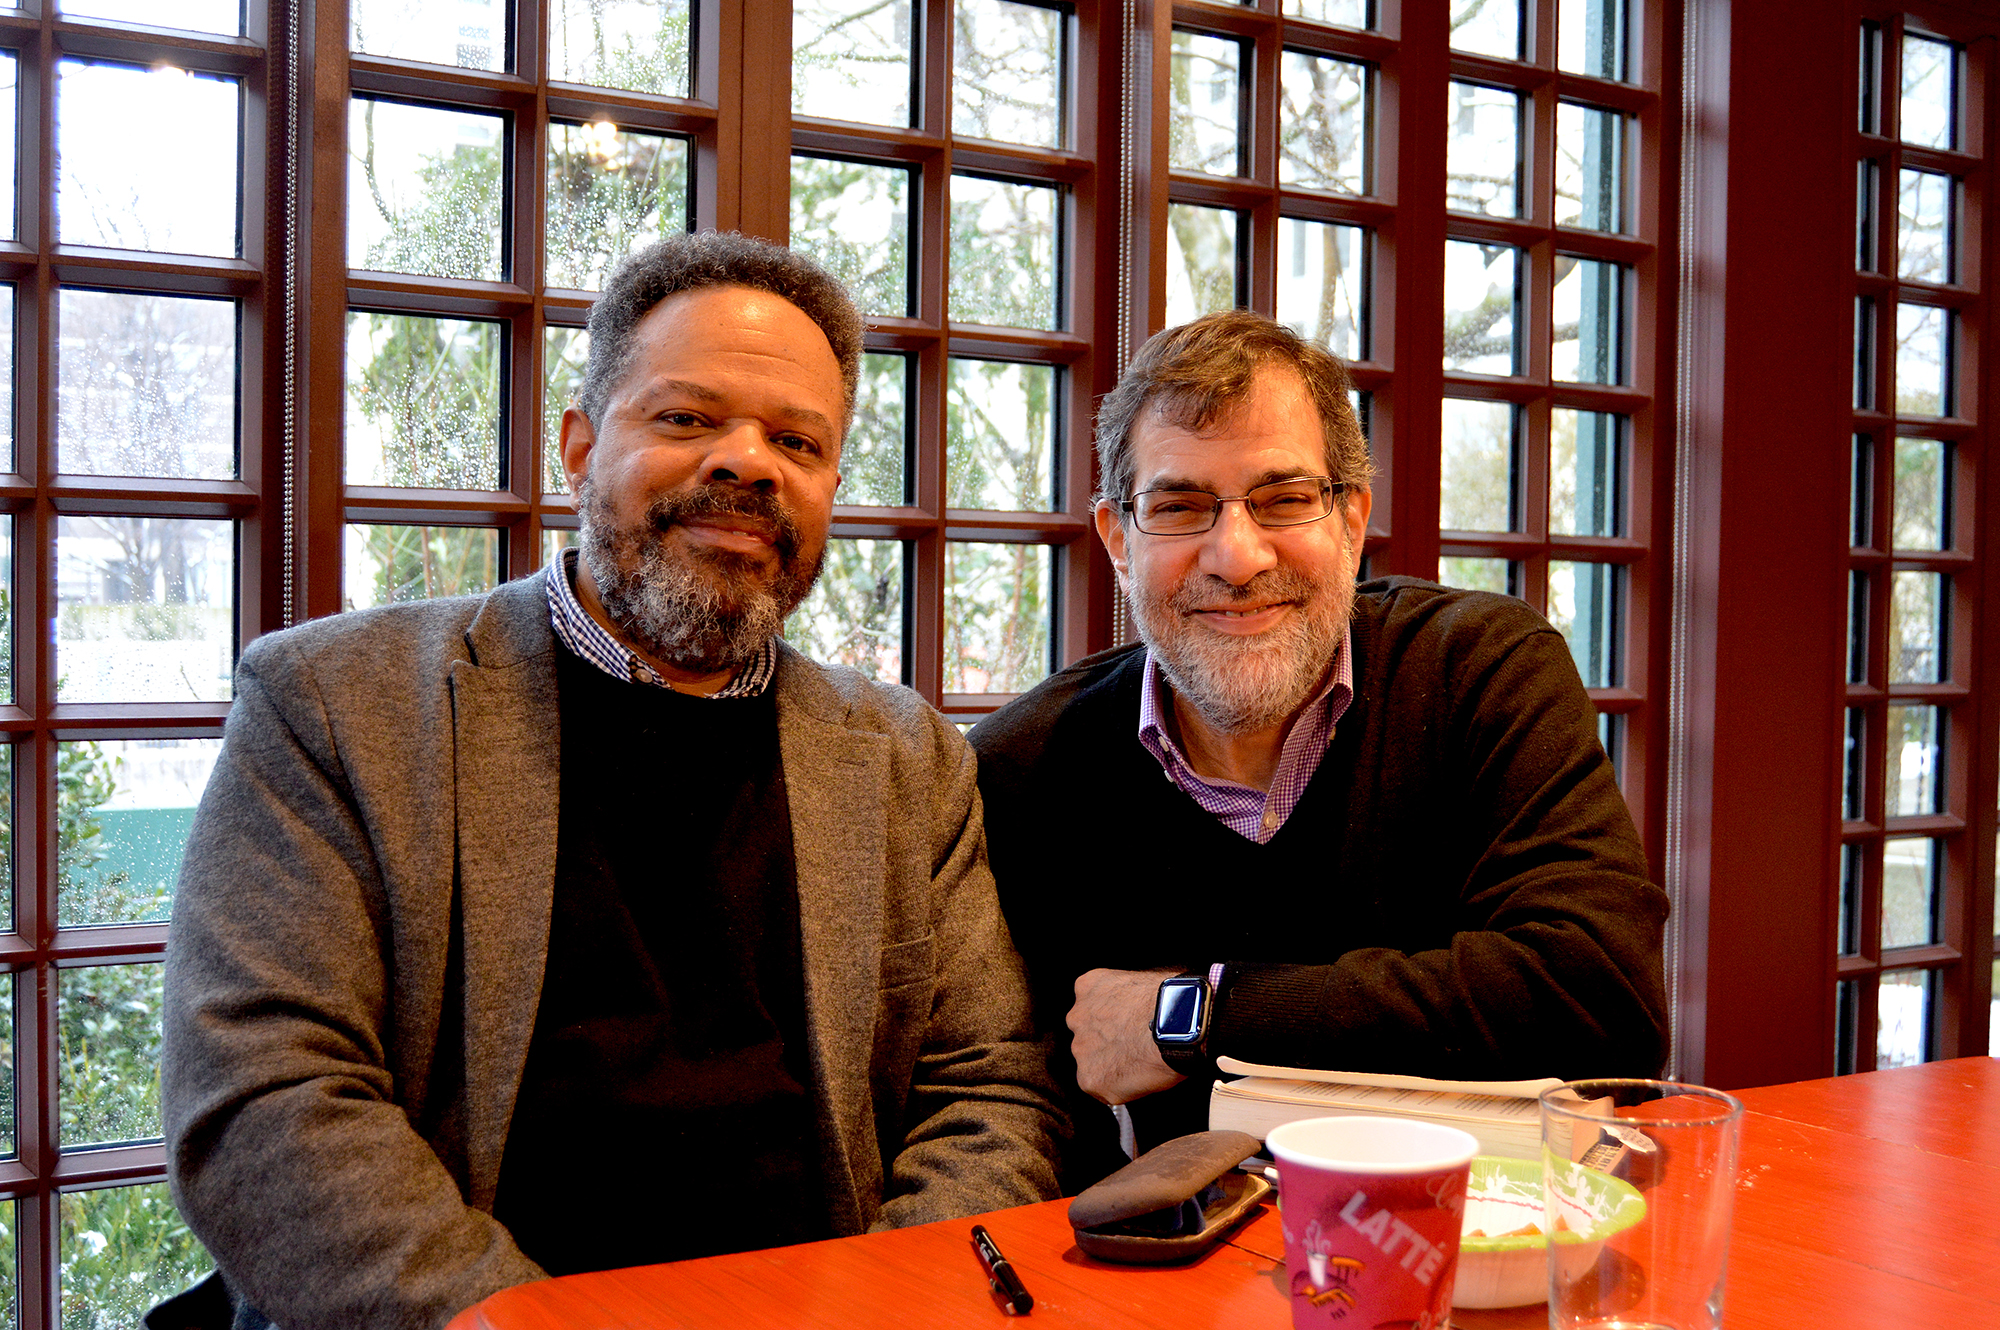 An author and Al Filreis smile at a table at the Kelly Writers House.